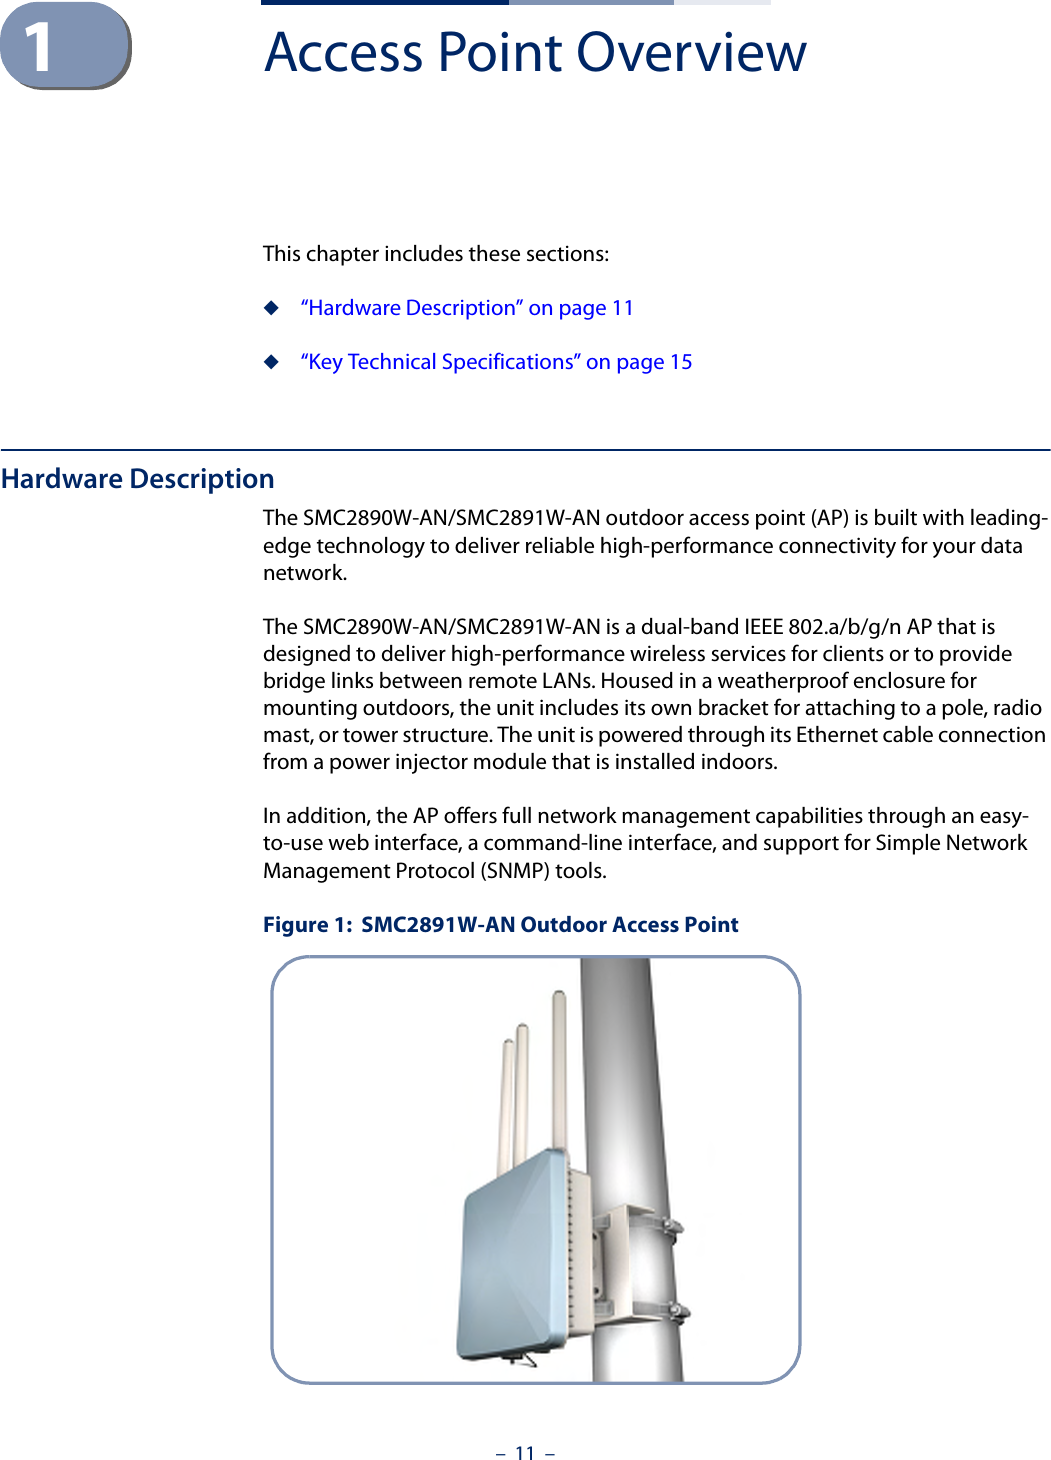 –  11  –1Access Point OverviewThis chapter includes these sections:◆“Hardware Description” on page 11◆“Key Technical Specifications” on page 15Hardware DescriptionThe SMC2890W-AN/SMC2891W-AN outdoor access point (AP) is built with leading-edge technology to deliver reliable high-performance connectivity for your data network.The SMC2890W-AN/SMC2891W-AN is a dual-band IEEE 802.a/b/g/n AP that is designed to deliver high-performance wireless services for clients or to provide bridge links between remote LANs. Housed in a weatherproof enclosure for mounting outdoors, the unit includes its own bracket for attaching to a pole, radio mast, or tower structure. The unit is powered through its Ethernet cable connection from a power injector module that is installed indoors.In addition, the AP offers full network management capabilities through an easy-to-use web interface, a command-line interface, and support for Simple Network Management Protocol (SNMP) tools.Figure 1:  SMC2891W-AN Outdoor Access Point